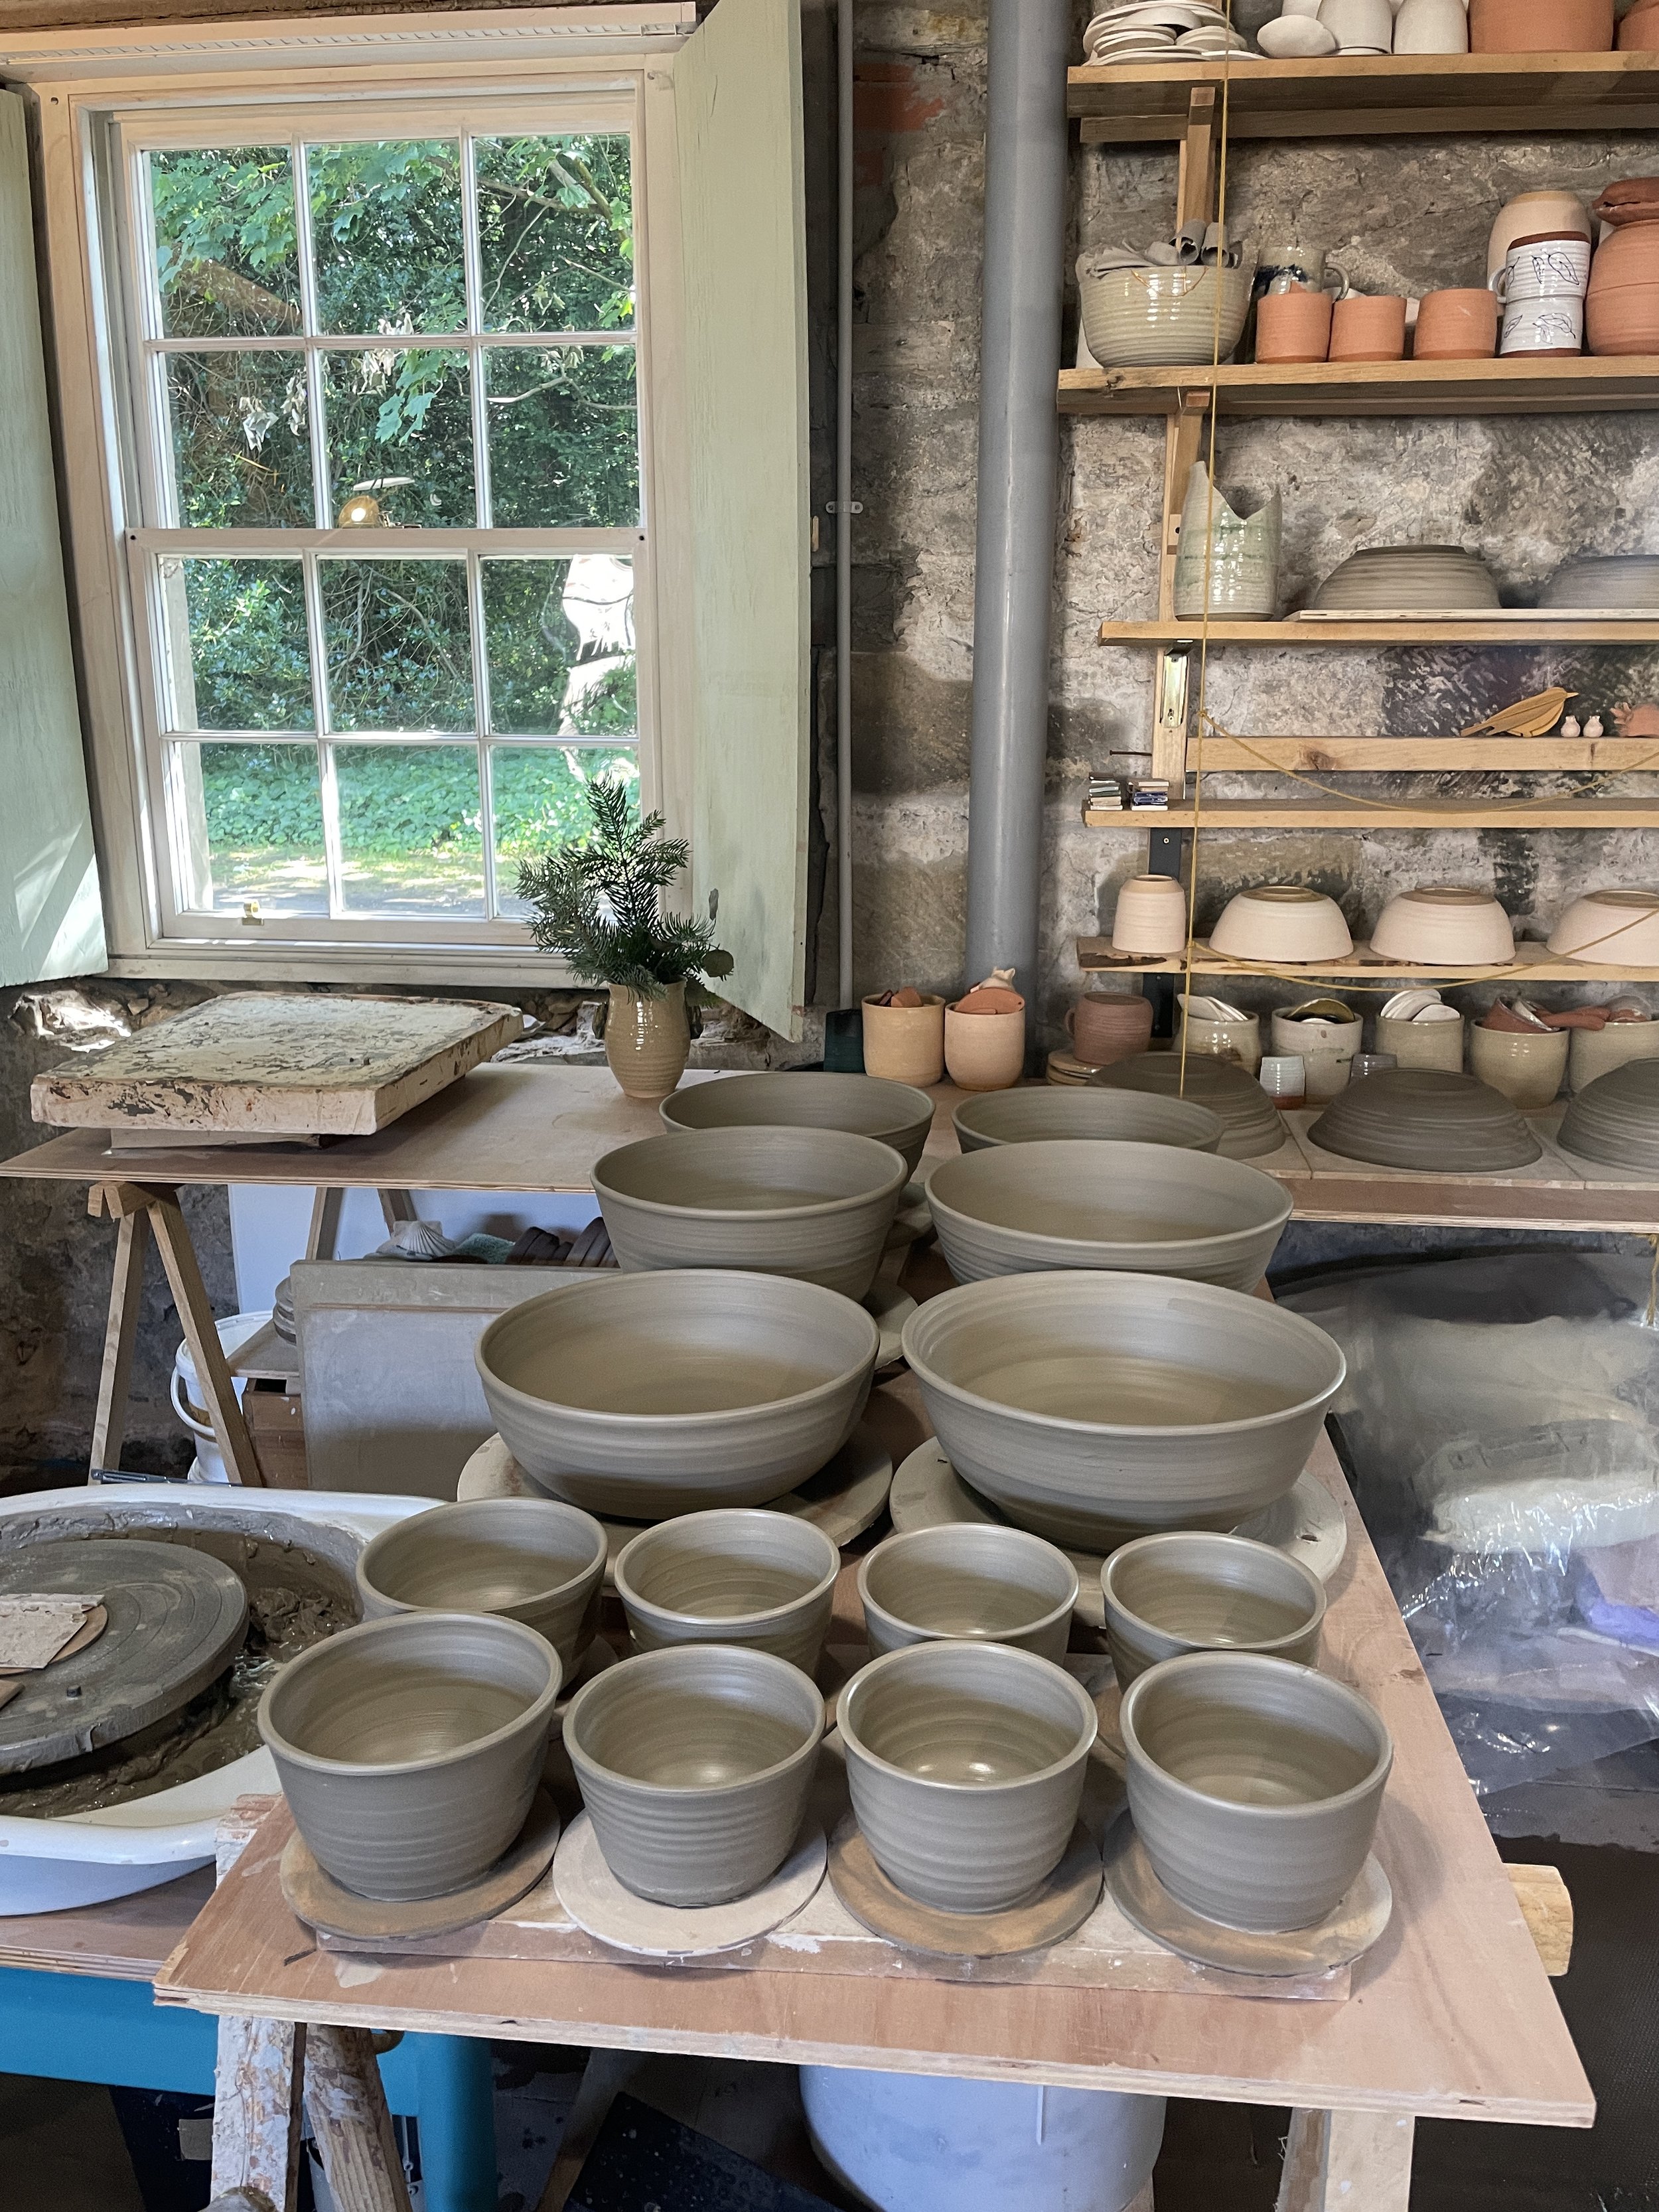 Table full of clay bowls